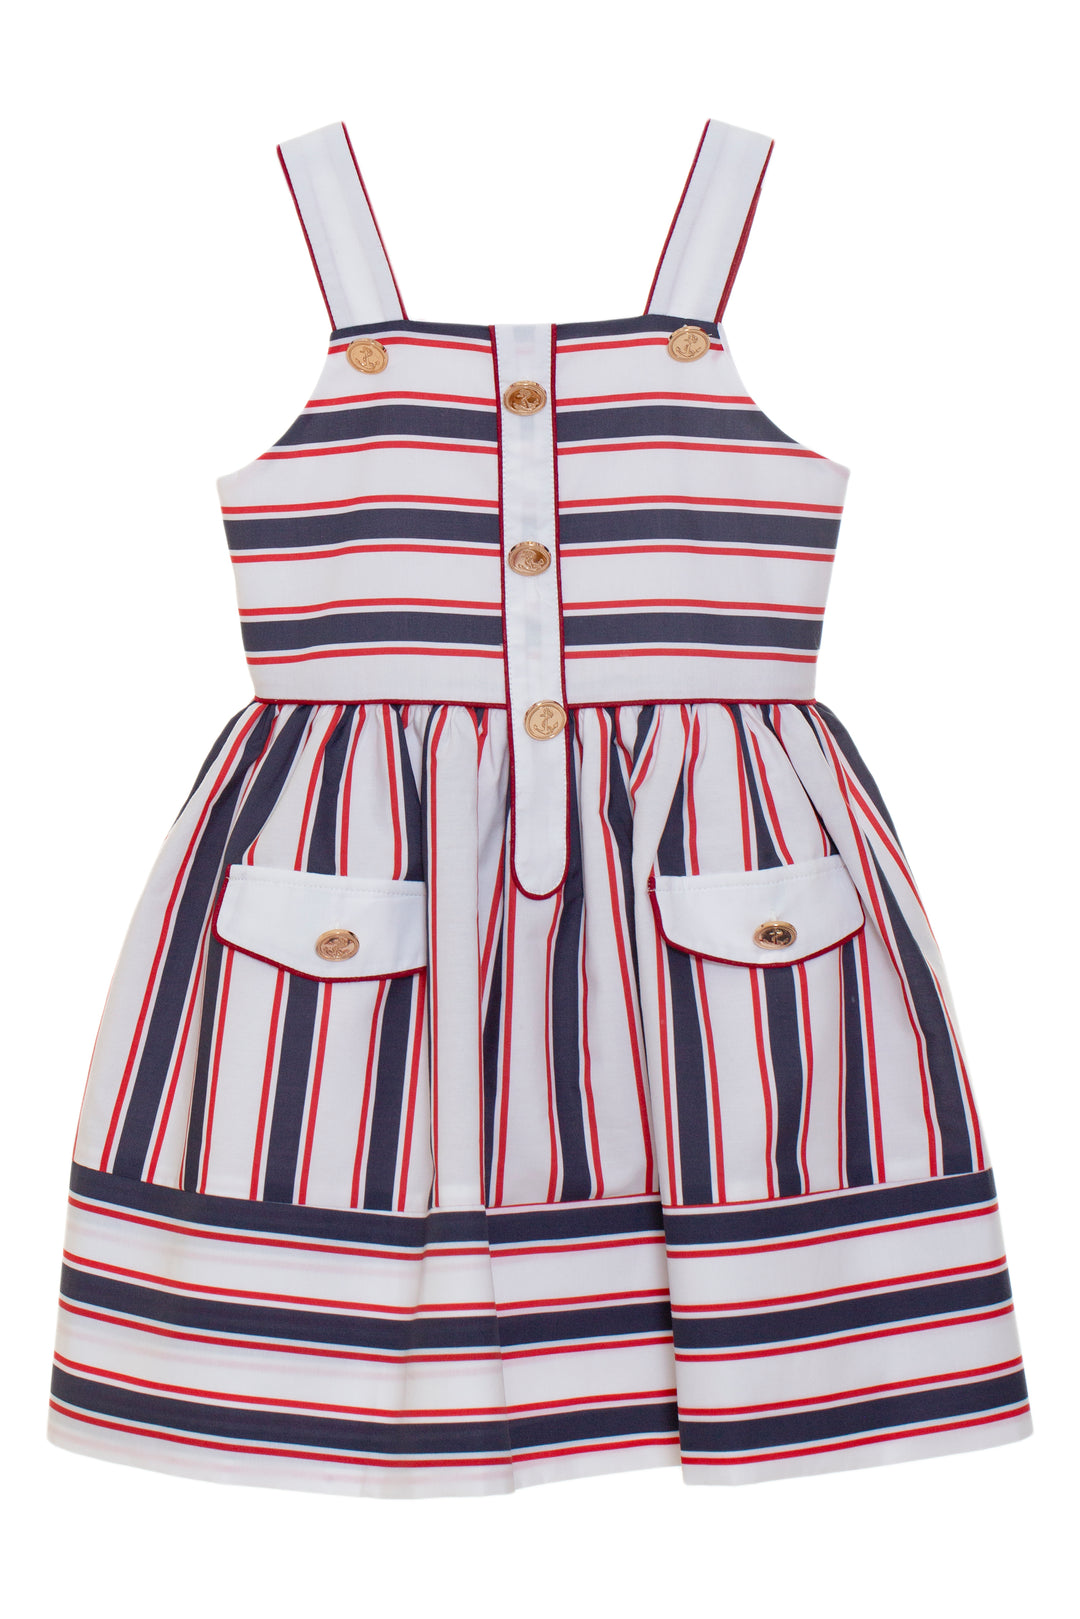 Patachou "Nylah" Red & Navy Striped Dress | iphoneandroidapplications